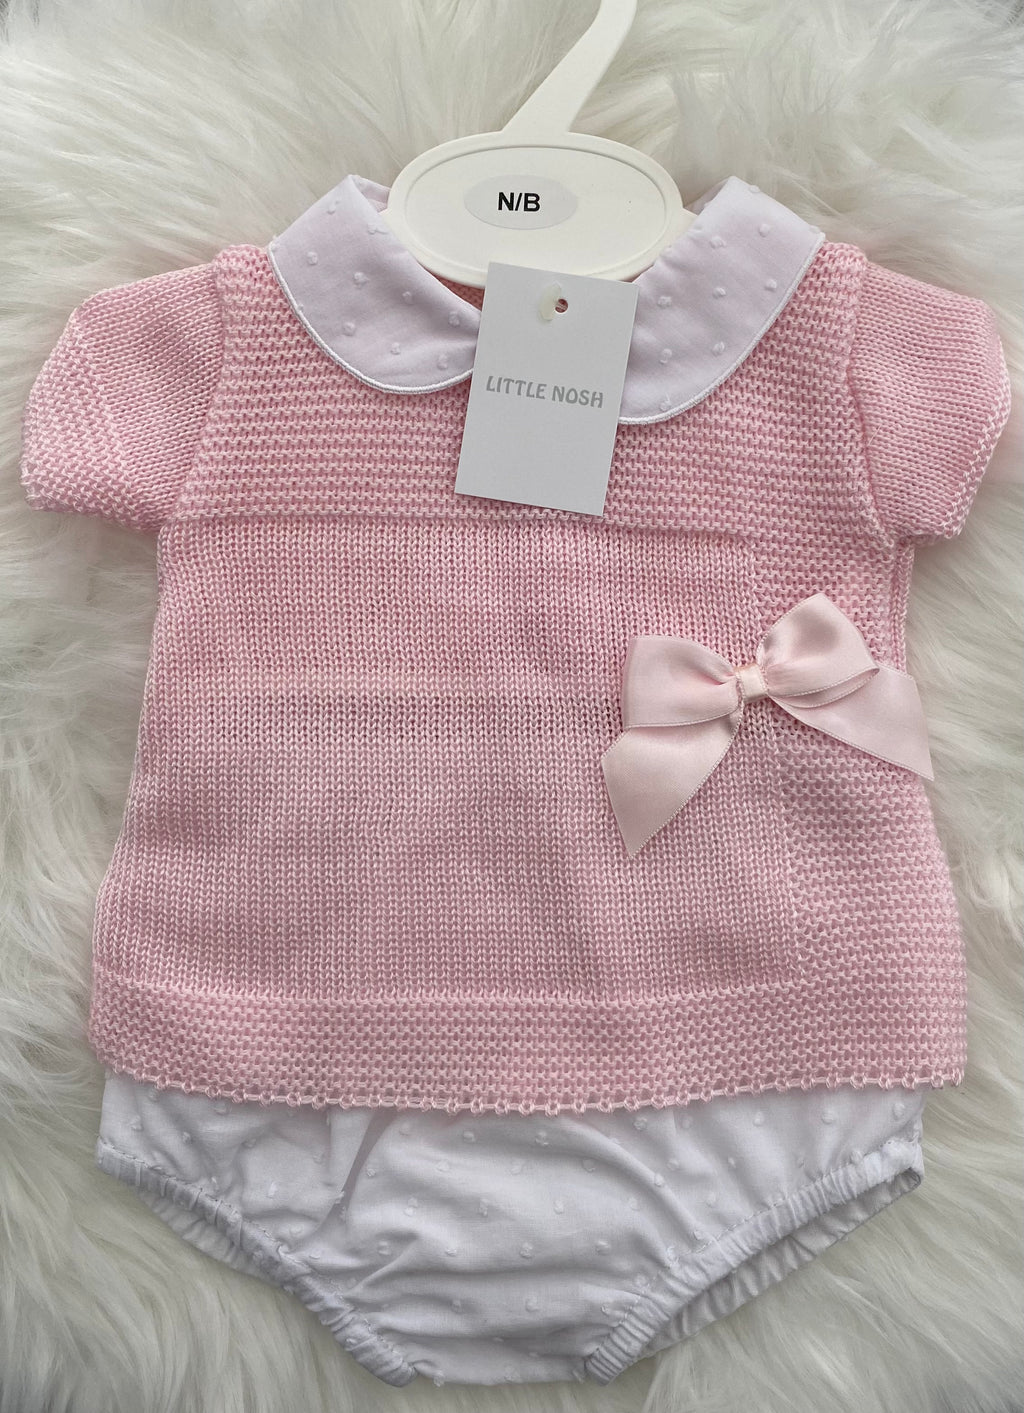 Little Nosh - Knitted Top and Bloomer Set - MC801